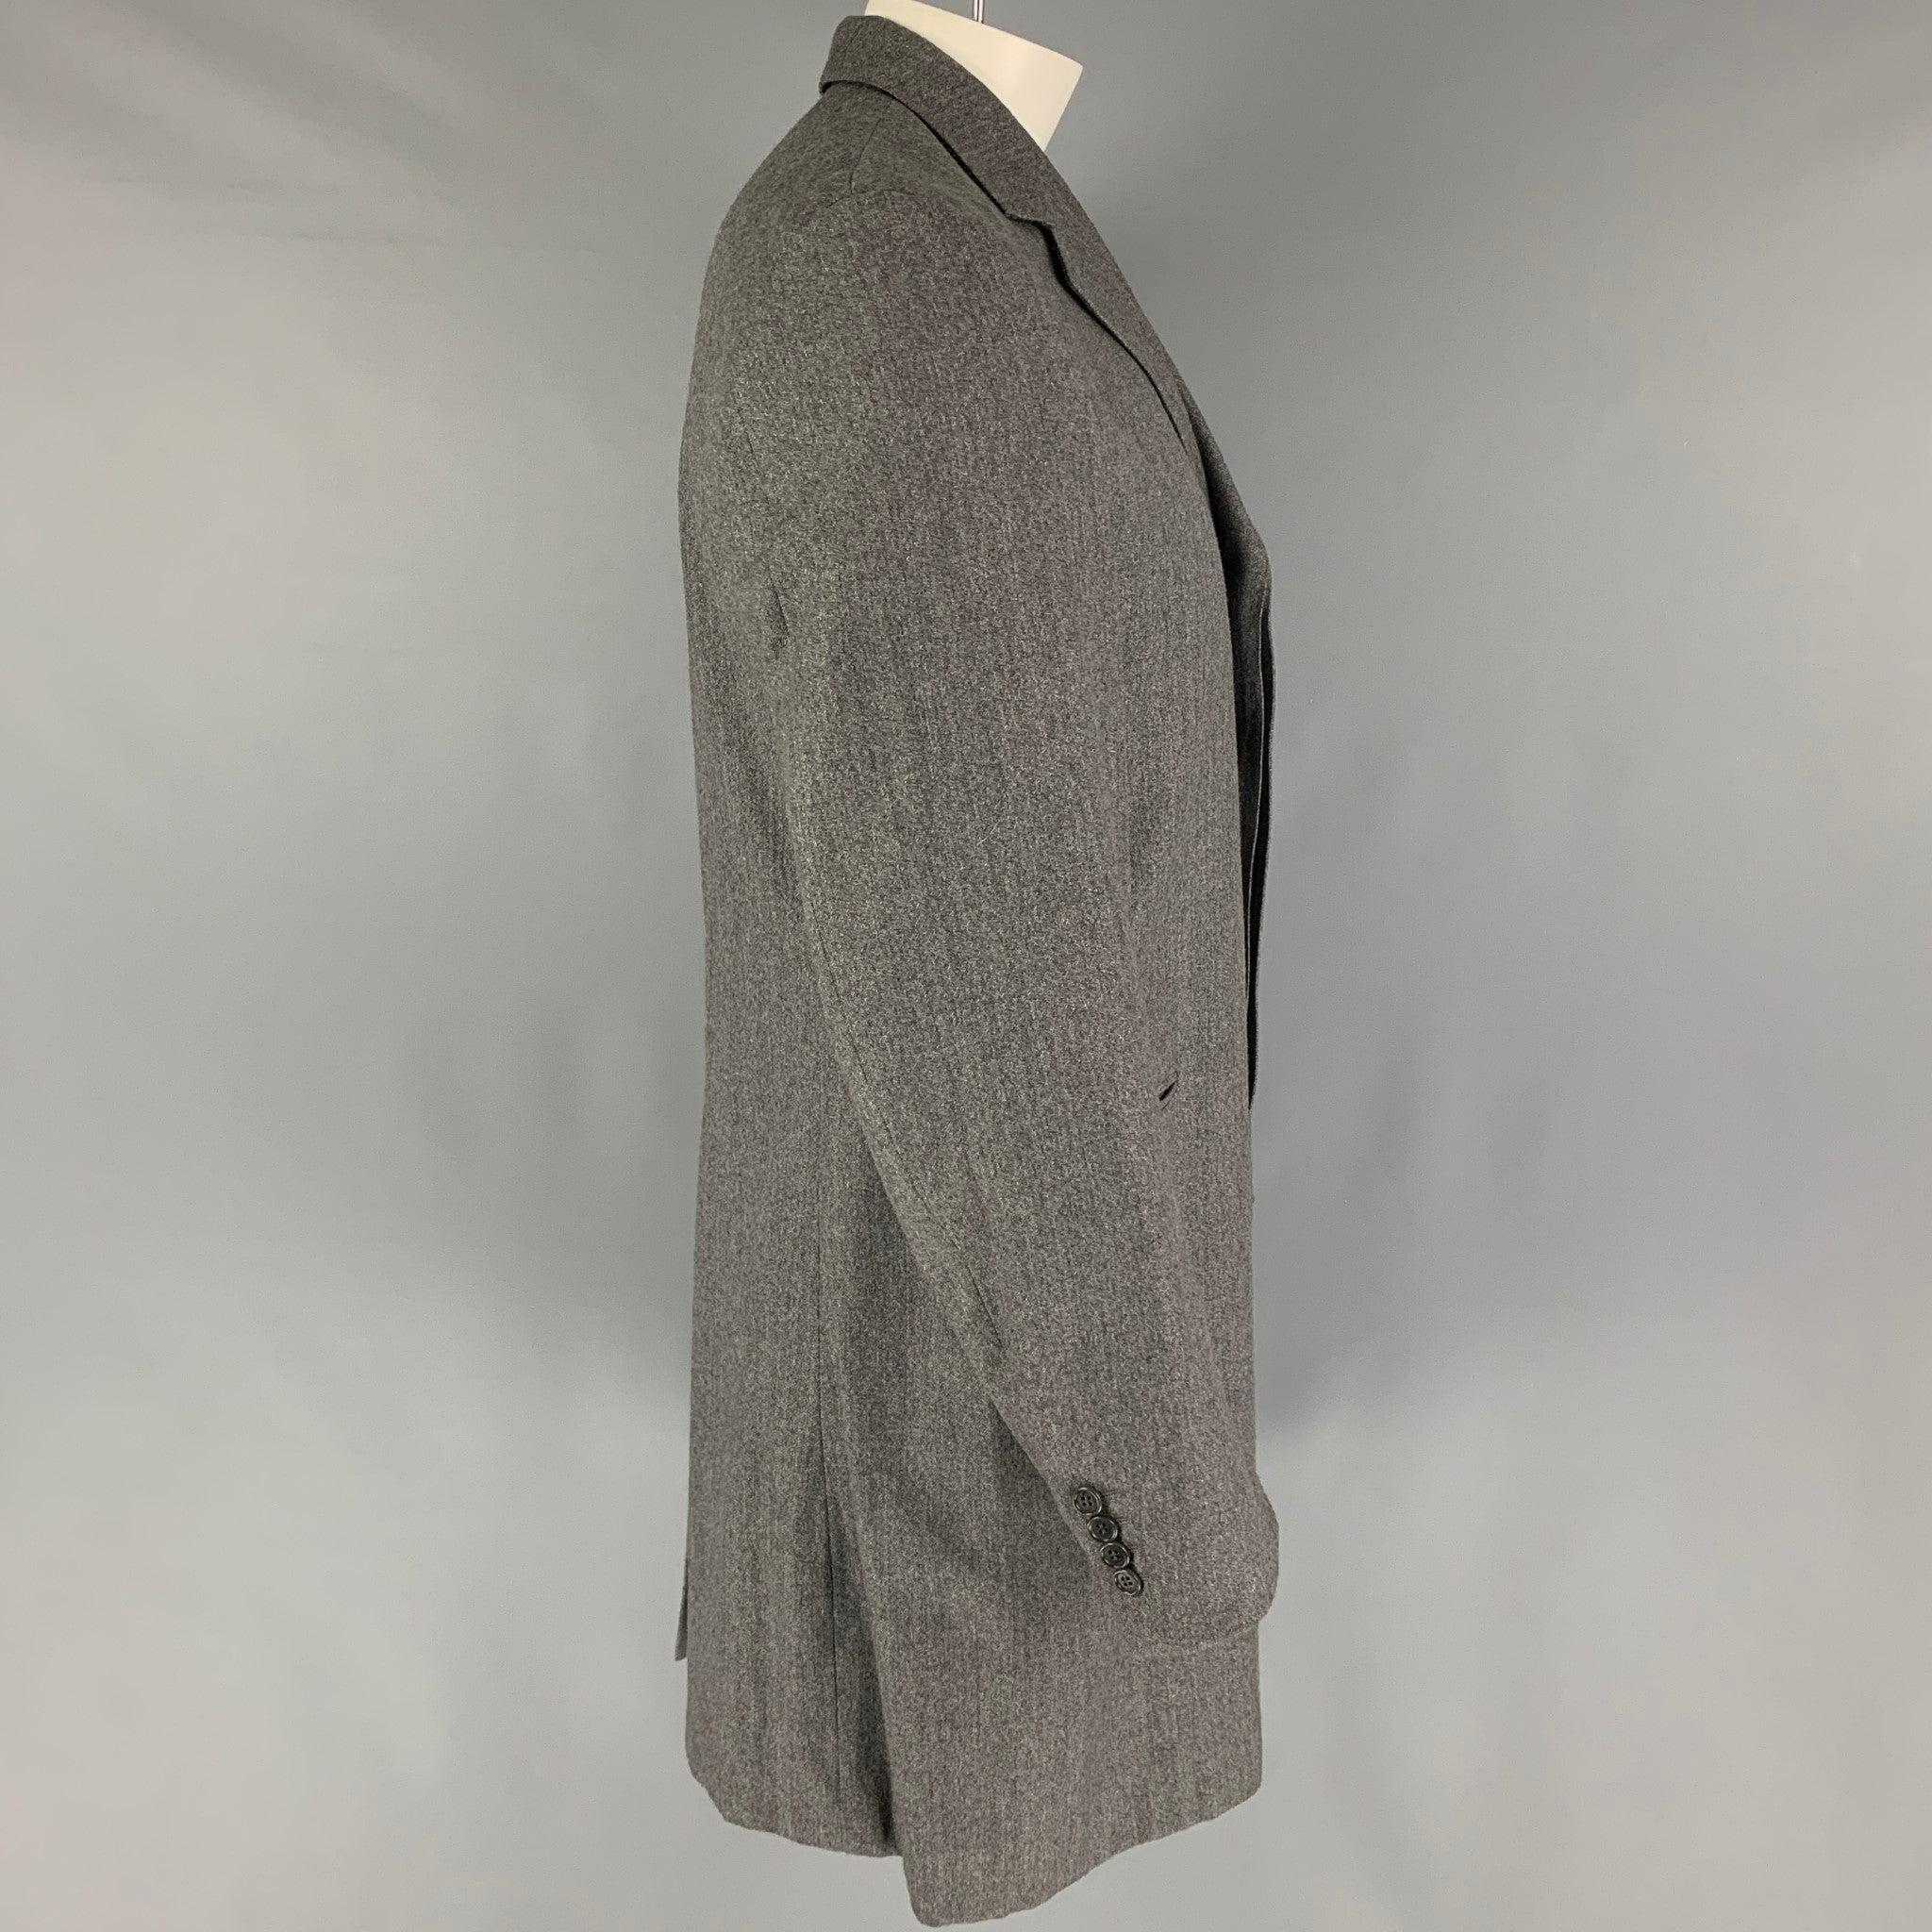 PS by PAUL SMITH coat comes in a grey wool with a full liner featuring a notch lapel, slit pockets, single back vent, and a hidden placket closure. Made in Italy.
Excellent
Pre-Owned Condition. 

Marked:   L  

Measurements: 
 
Shoulder: 18 inches